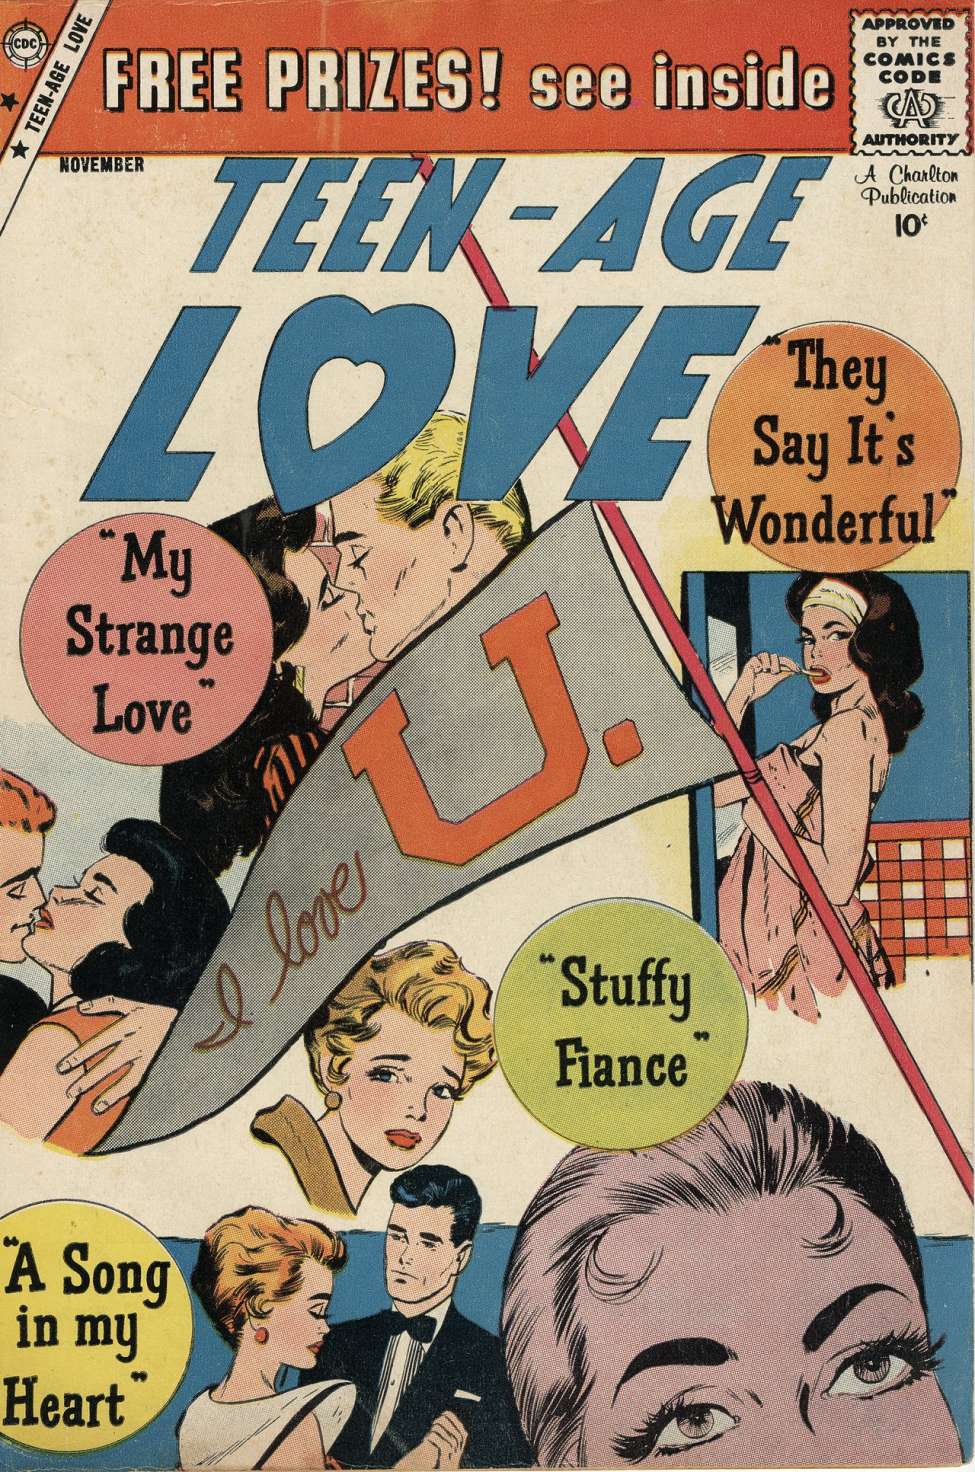 Book Cover For Teen-Age Love 11